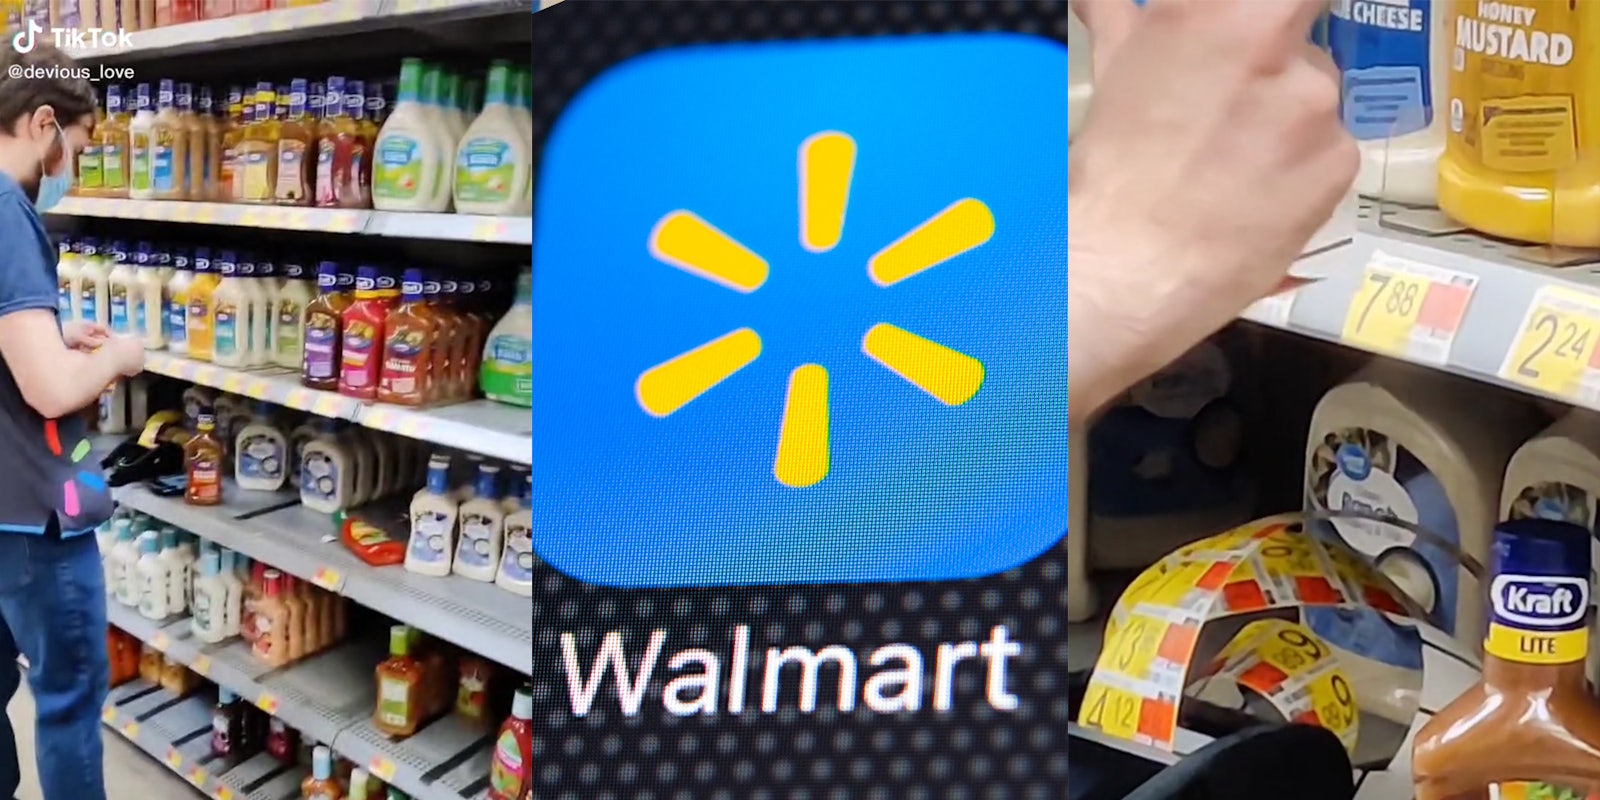 walmart worker changing price tags of salad dressing from 2.24 to 7.88 (l & r) walmart logo (c)